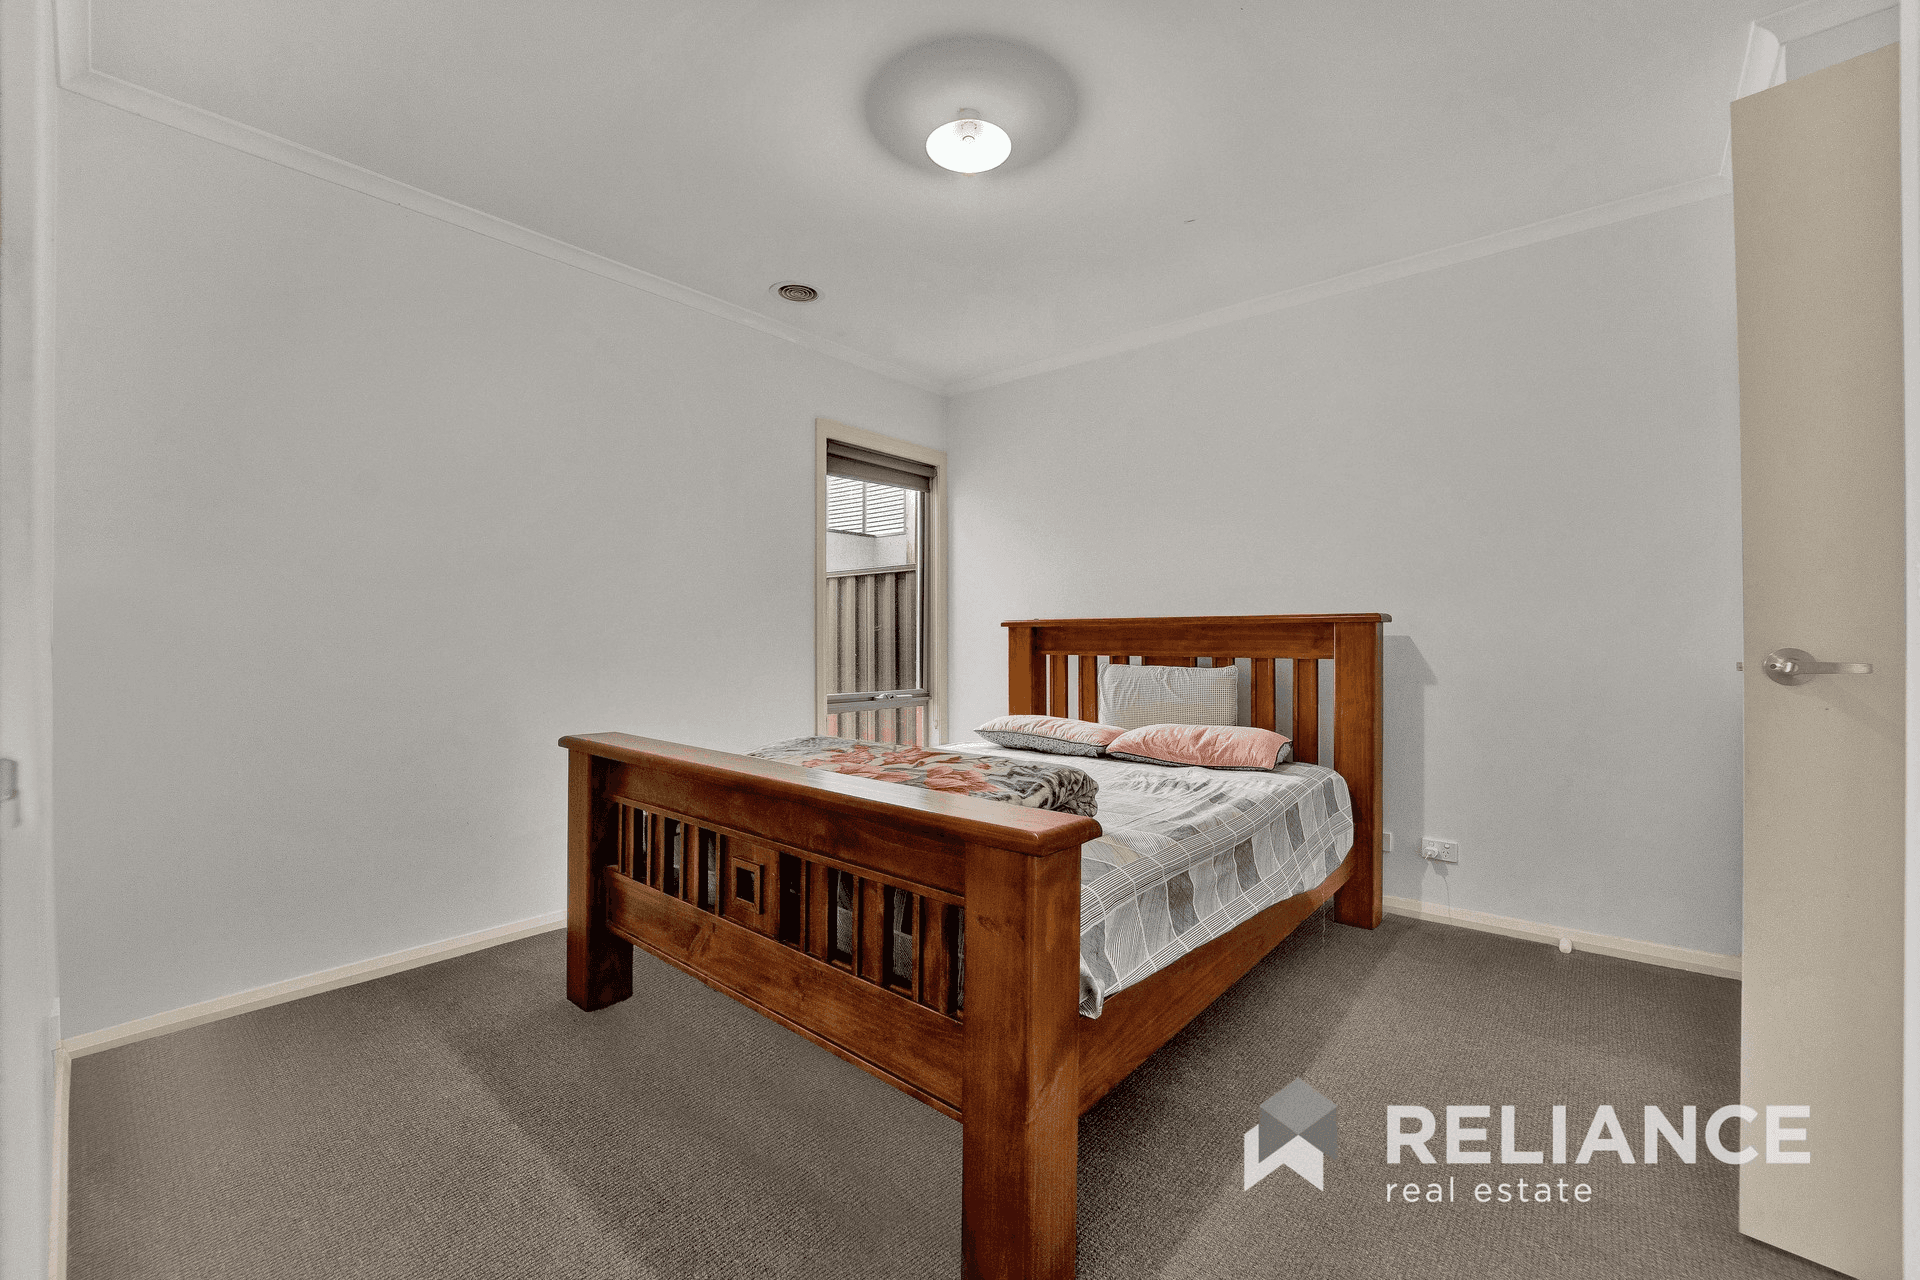 3/126 Bethany Road, Hoppers Crossing, VIC 3029